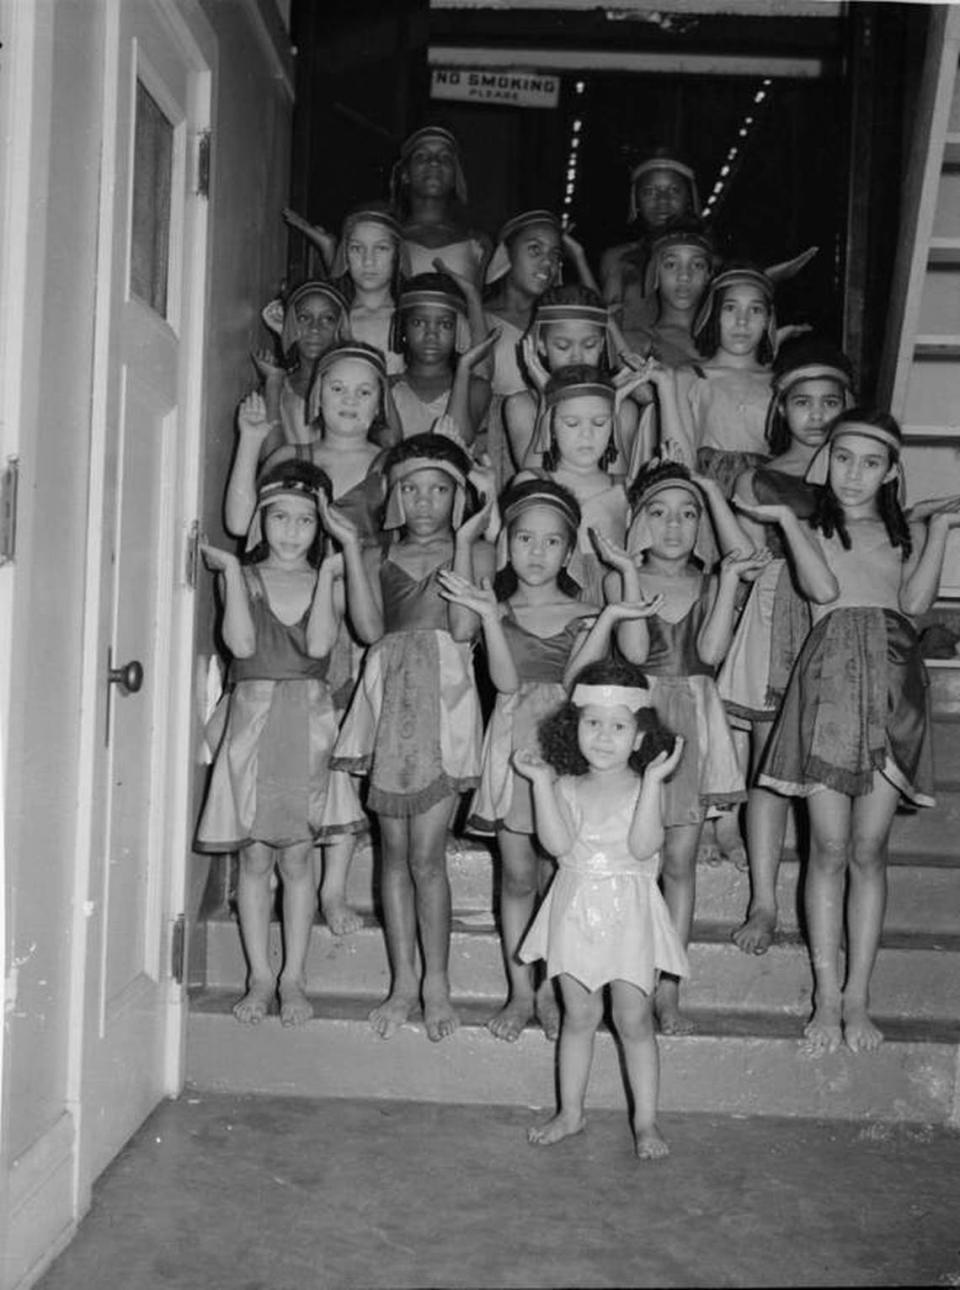 This 1941 photo captured children wearing Egyptian costumes for the National Negro Opera Company’s performance of “Aida.” Teenie Harris/courtesy of Carnegie Museum of Art